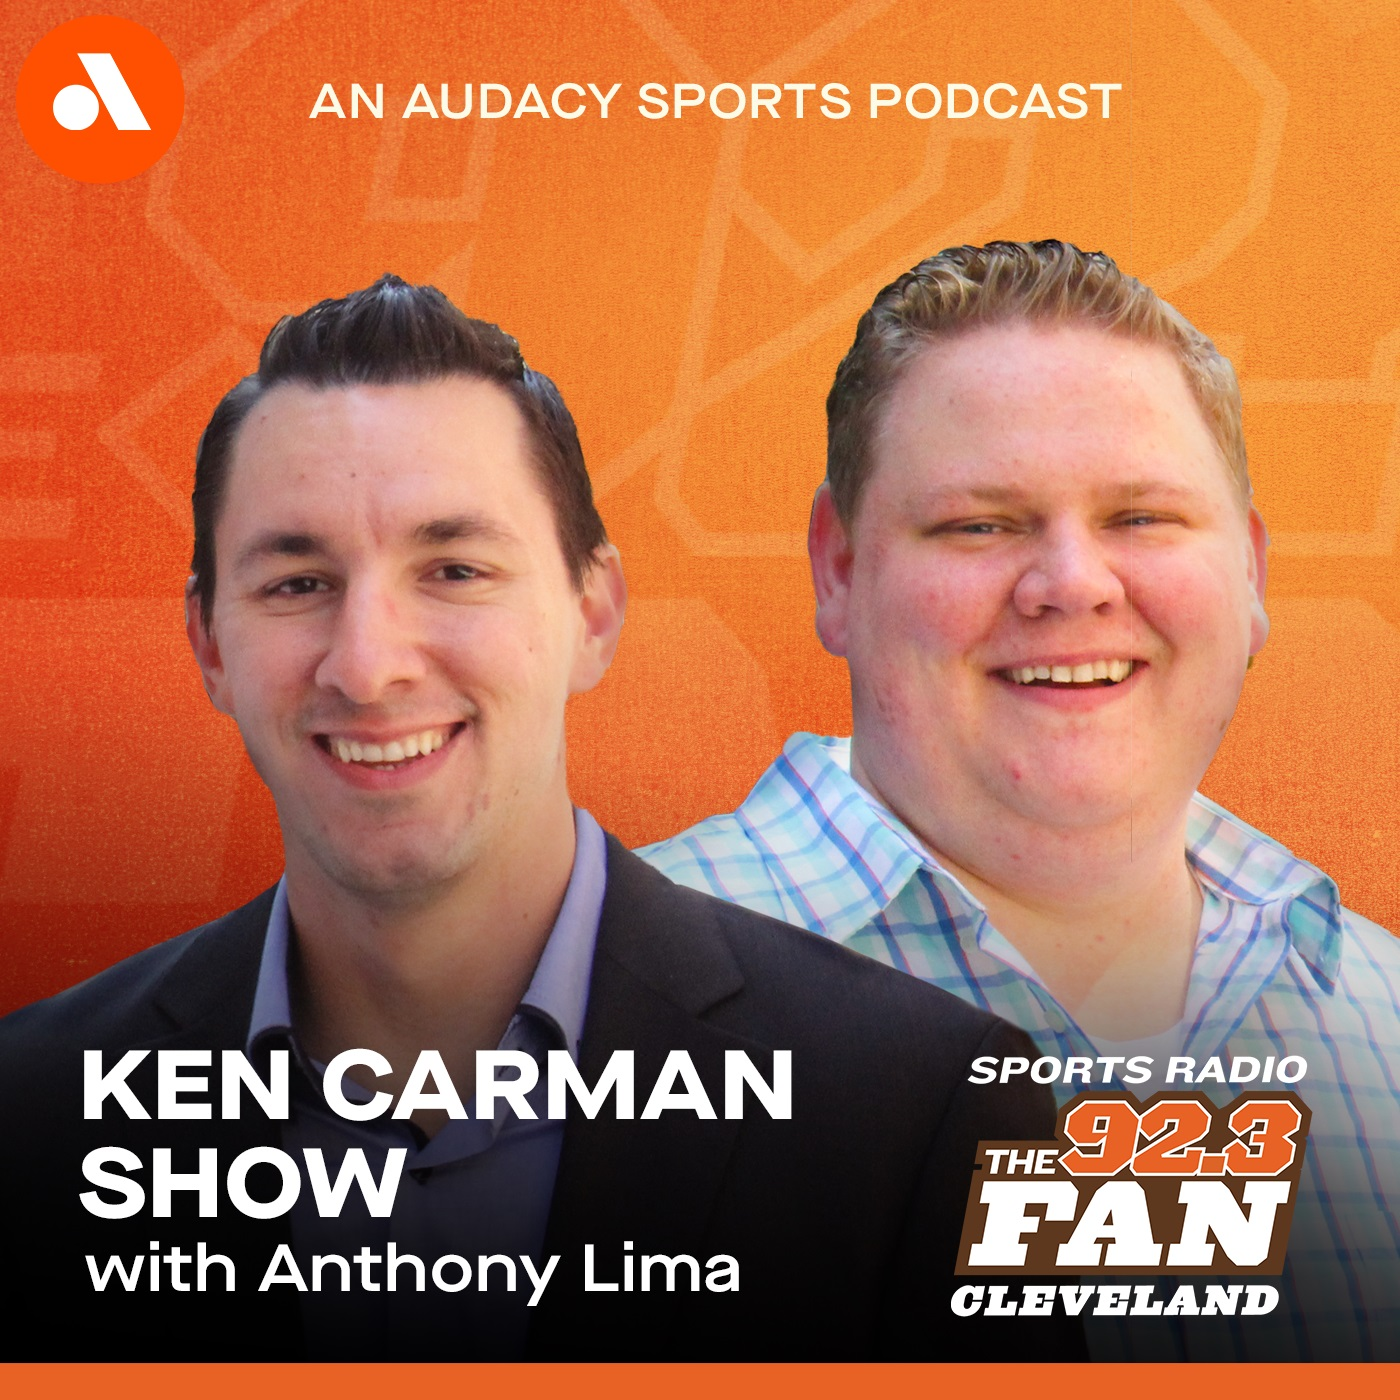 The Ken Carman Show with Anthony Lima react to Browns win over Vikings 14-7. "Thank God they won the game. Thank God for the Defense.